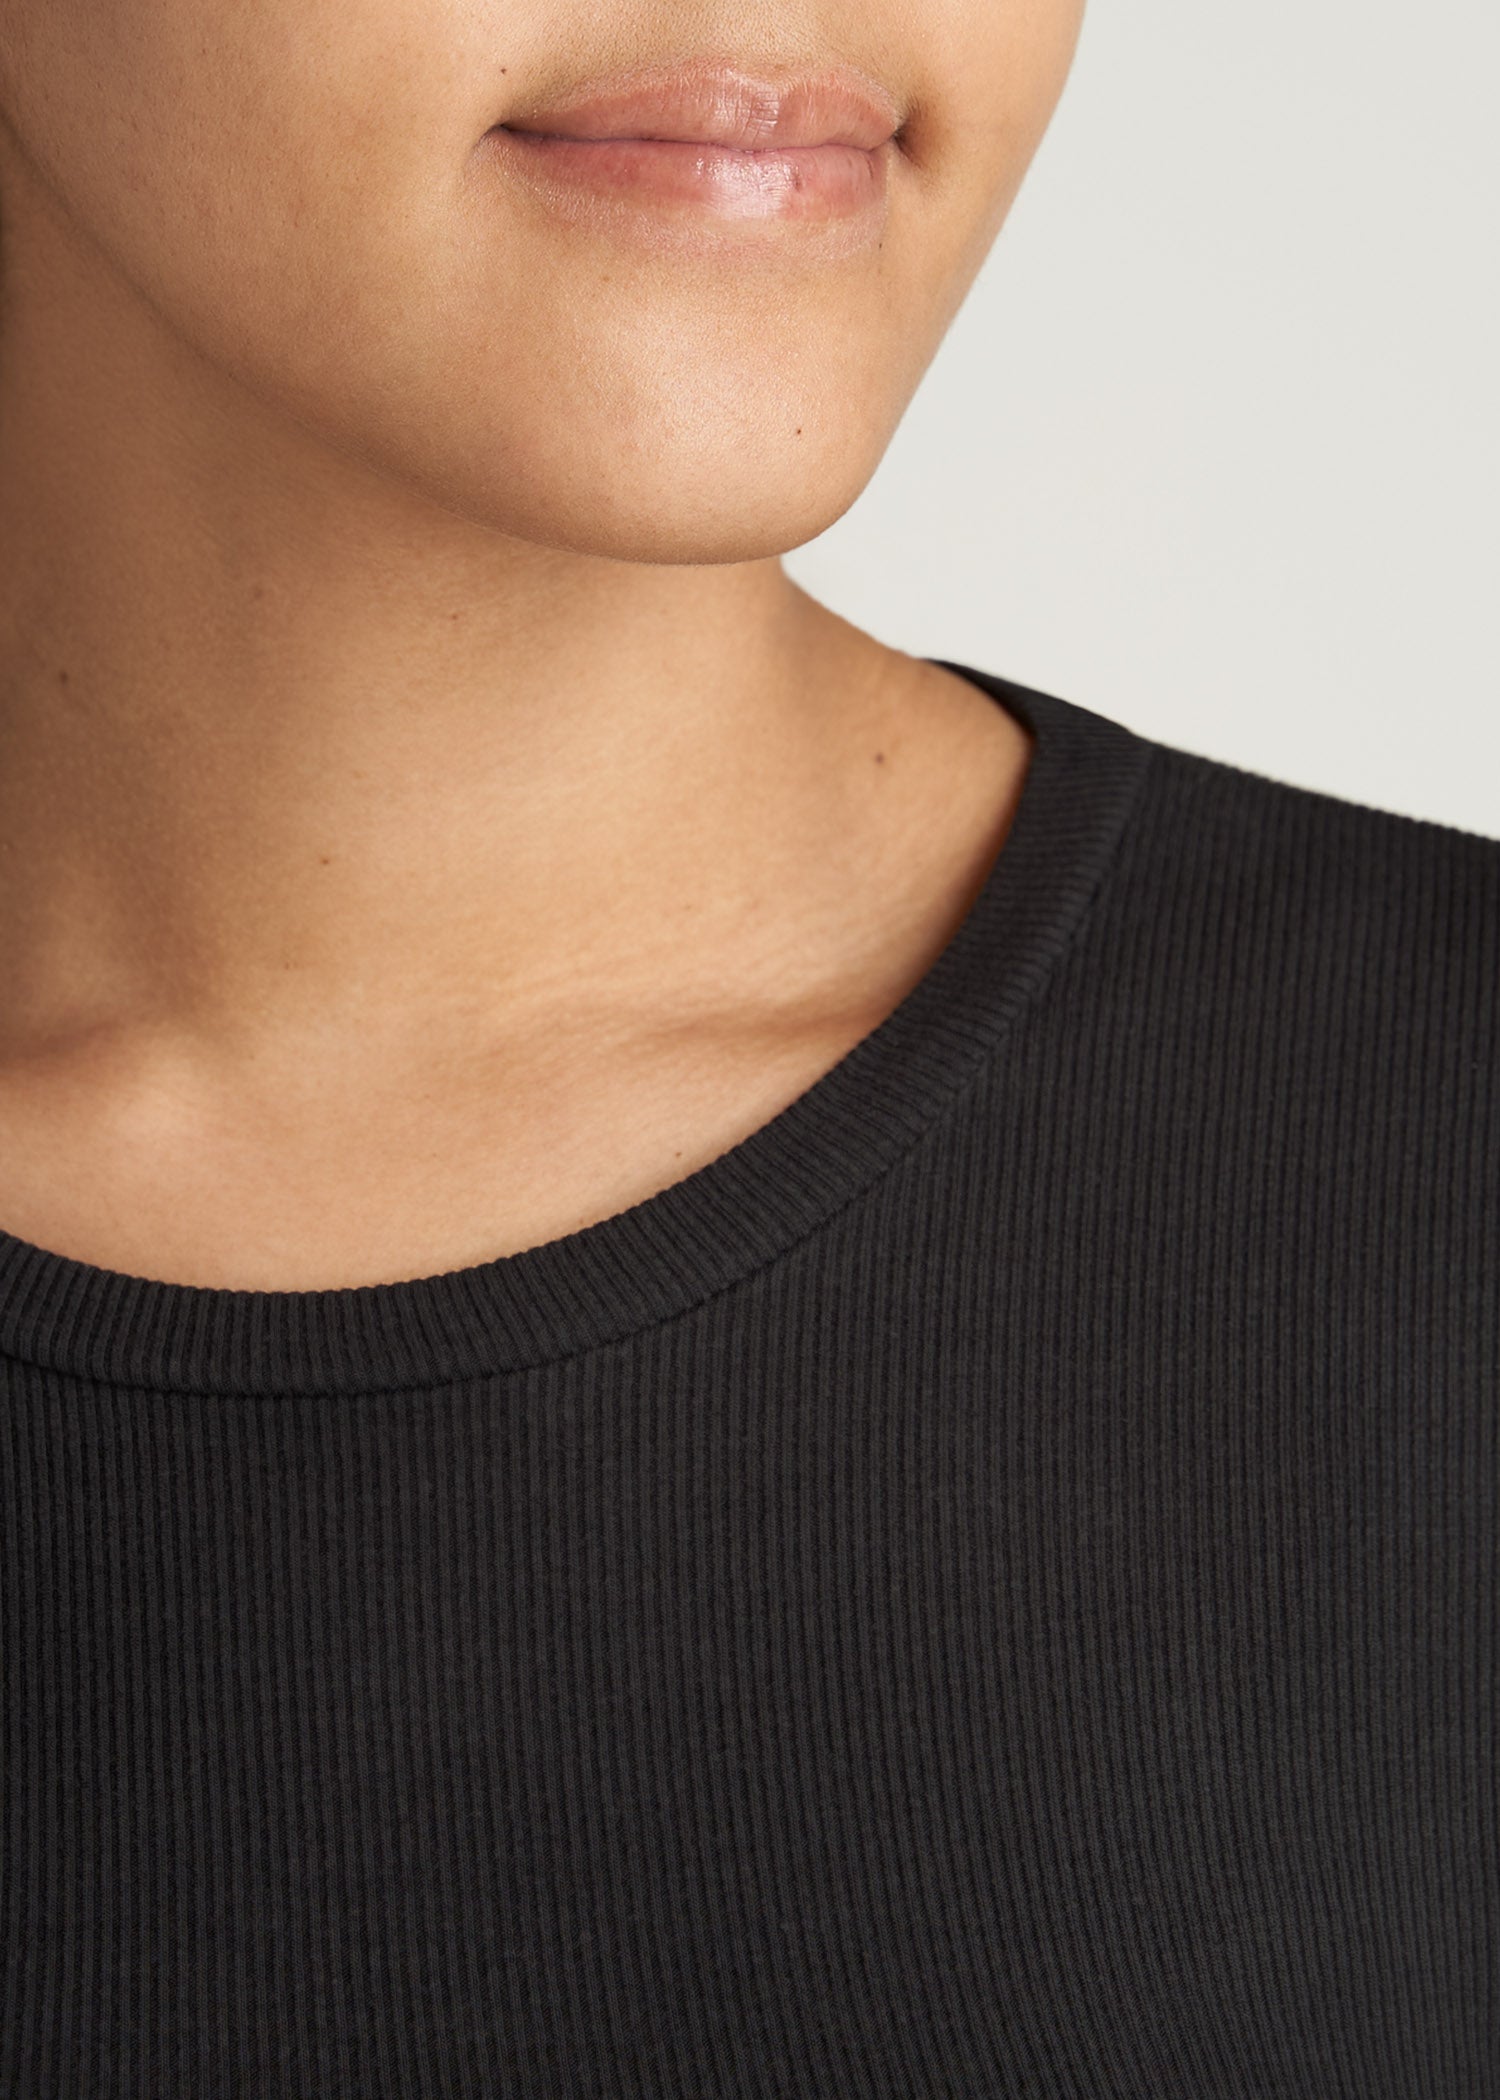 FITTED Ribbed Long Sleeve Tee in Black - Tall Women's Shirts